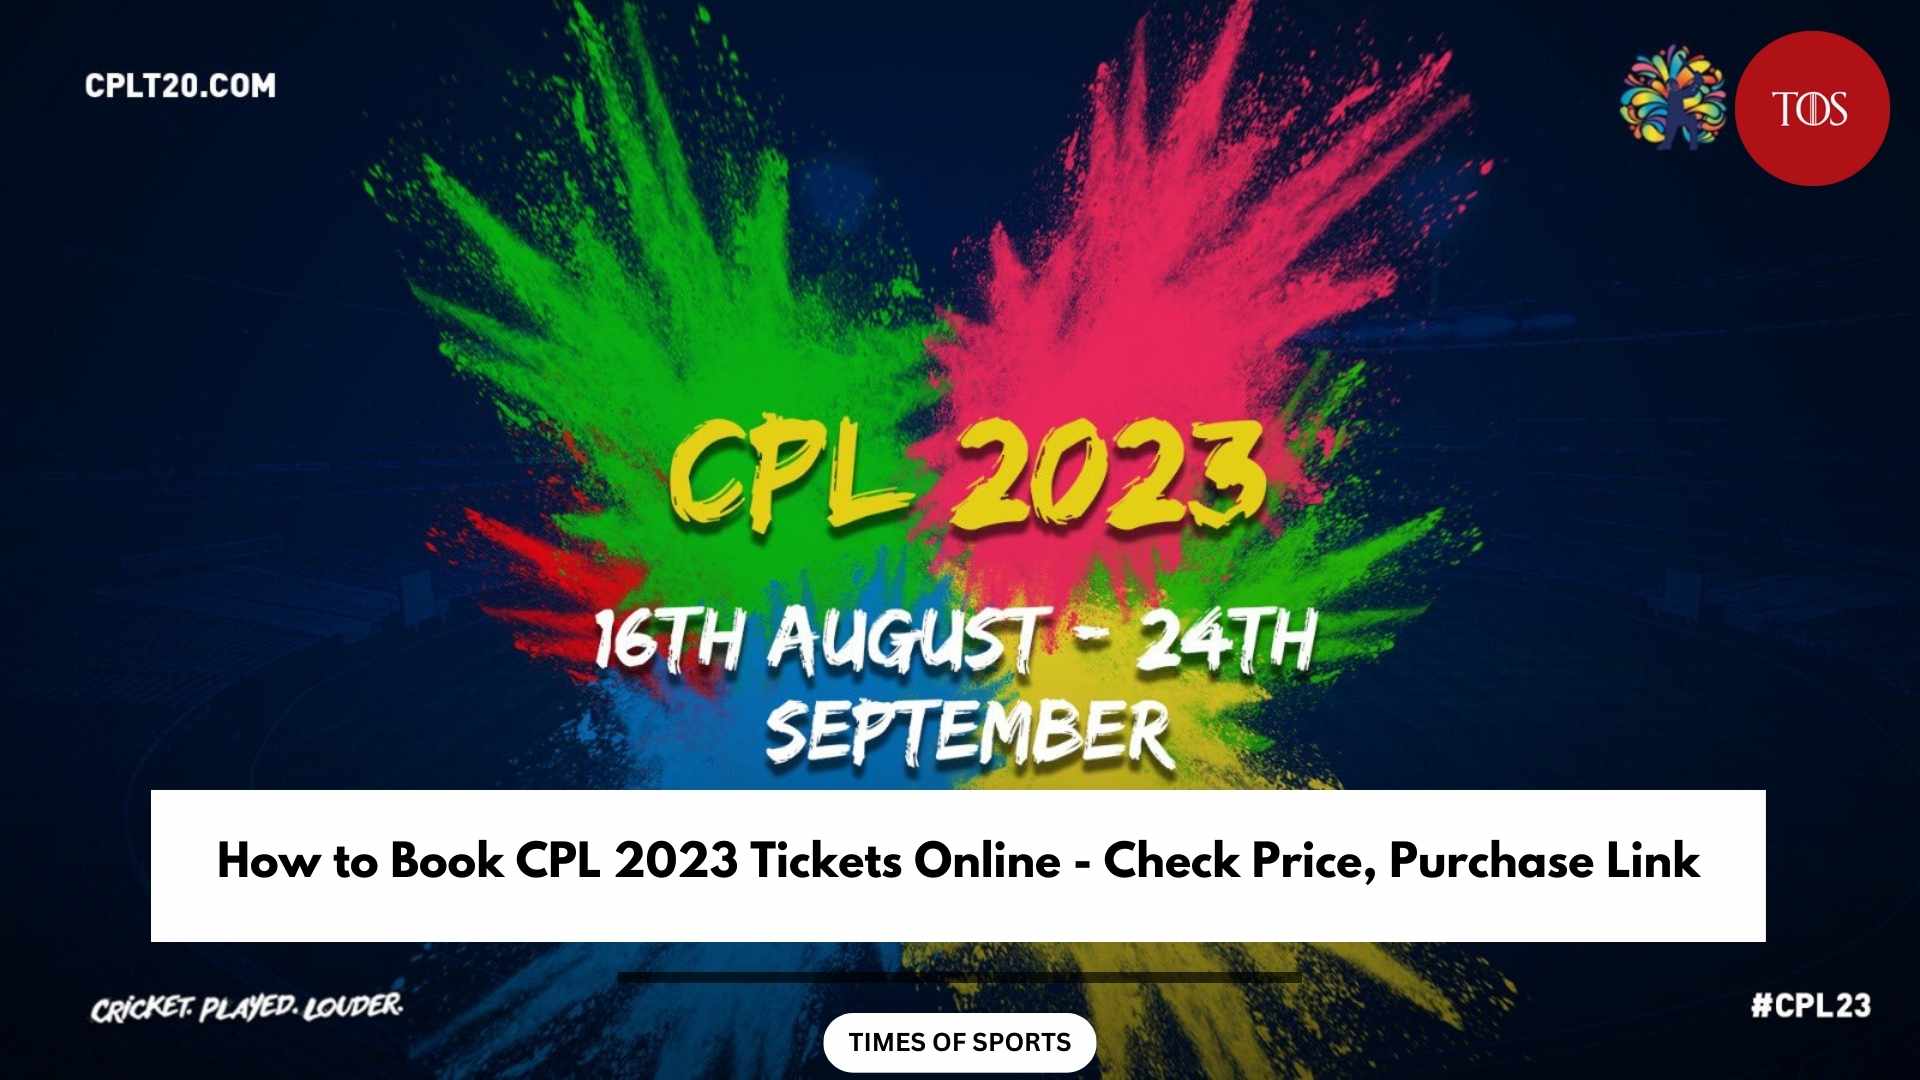 How to Book CPL 2023 Tickets Online Check Price, Purchase Link